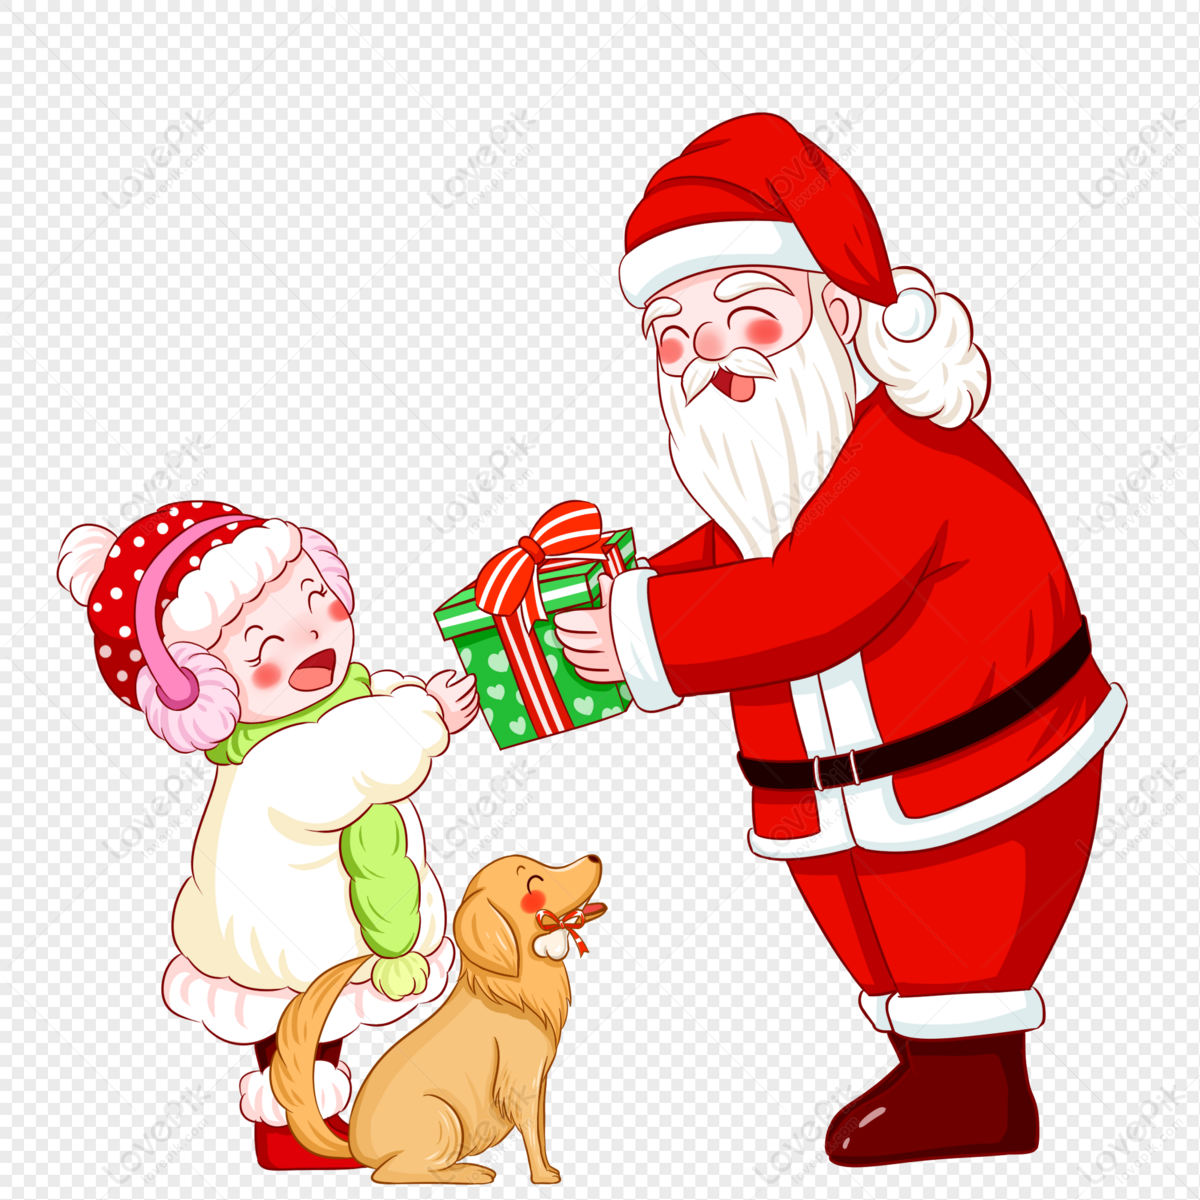 Funny Santa Claus cartoon giving a gifts to little boy crying